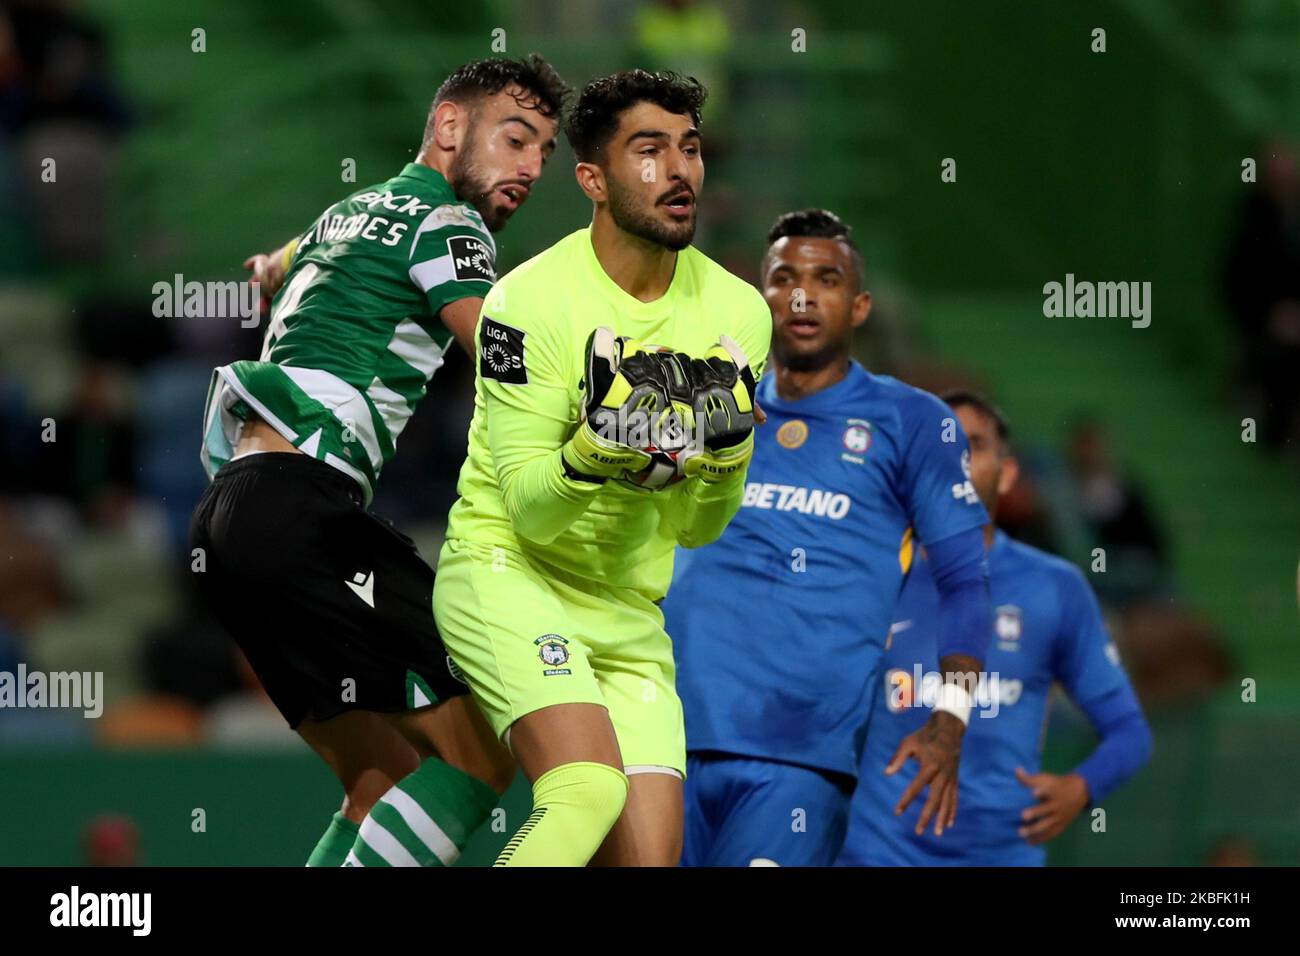 Amir Abedzadeh of CS Maritimo (C ) vies with Bruno Fernandes of Sporting CP (L) during the Portuguese League football match between Sporting CP and CS Maritimo at Jose Alvalade stadium in Lisbon, Portugal on January 27, 2020. (Photo by Pedro FiÃºza/NurPhoto) Stock Photo